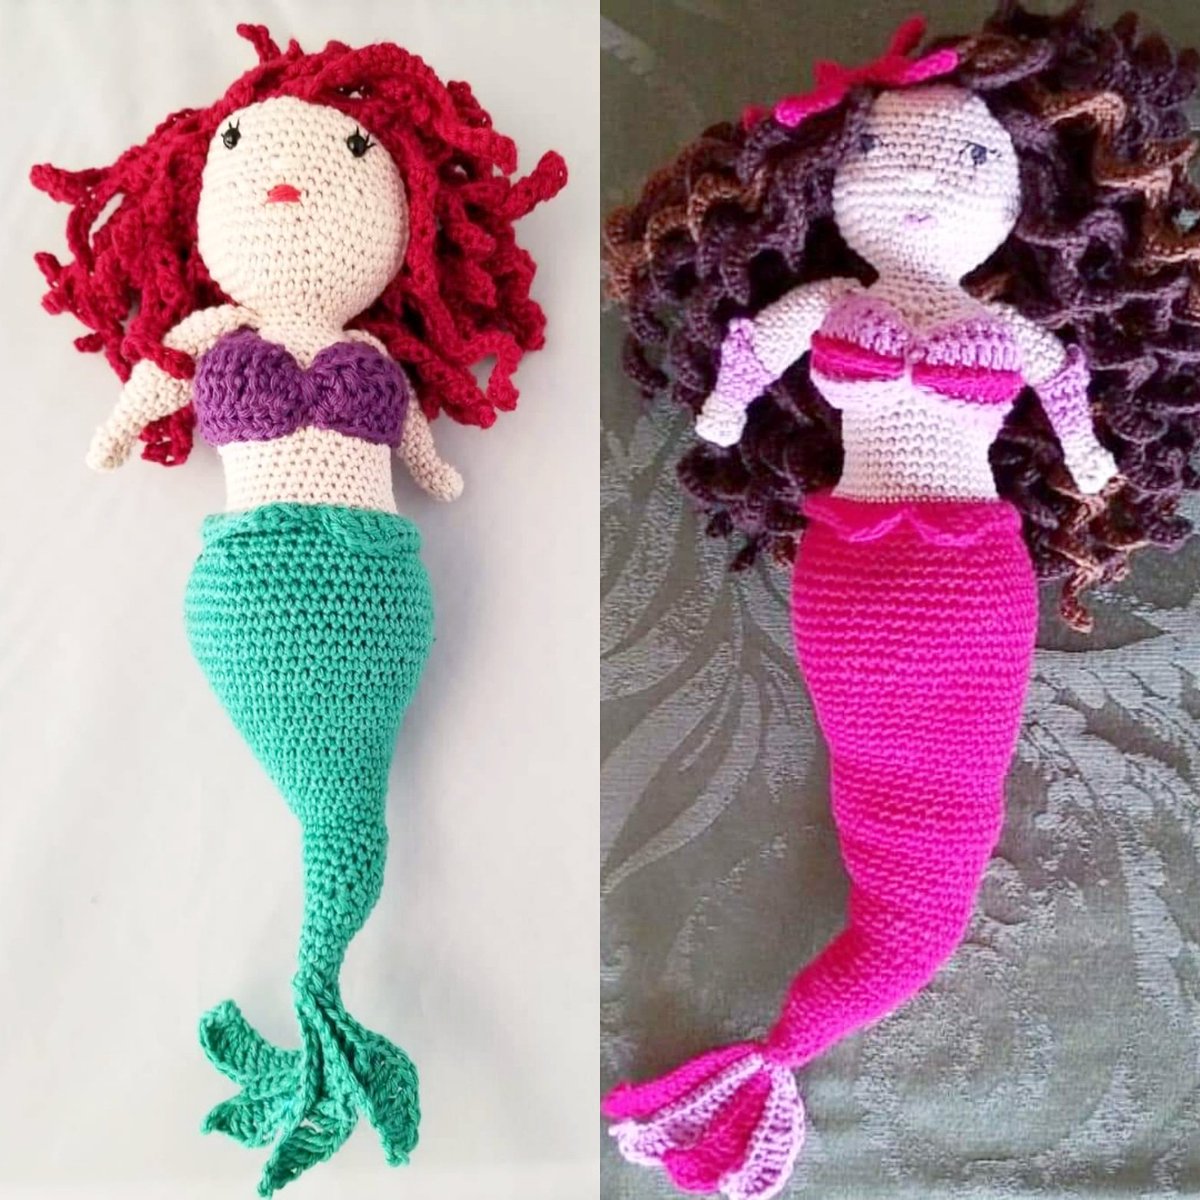 Happy first day of #mermay! 🧜

I'll be making more mermaids this summer!! Let me know if there are specific color combinations you'd like! 

Also, blessed Beltane! That one almost got past me.

#may1st
#beltane 
#mermaidamigurumi 
#mermaiddoll 
#littleaquagirl 
#amigurumi